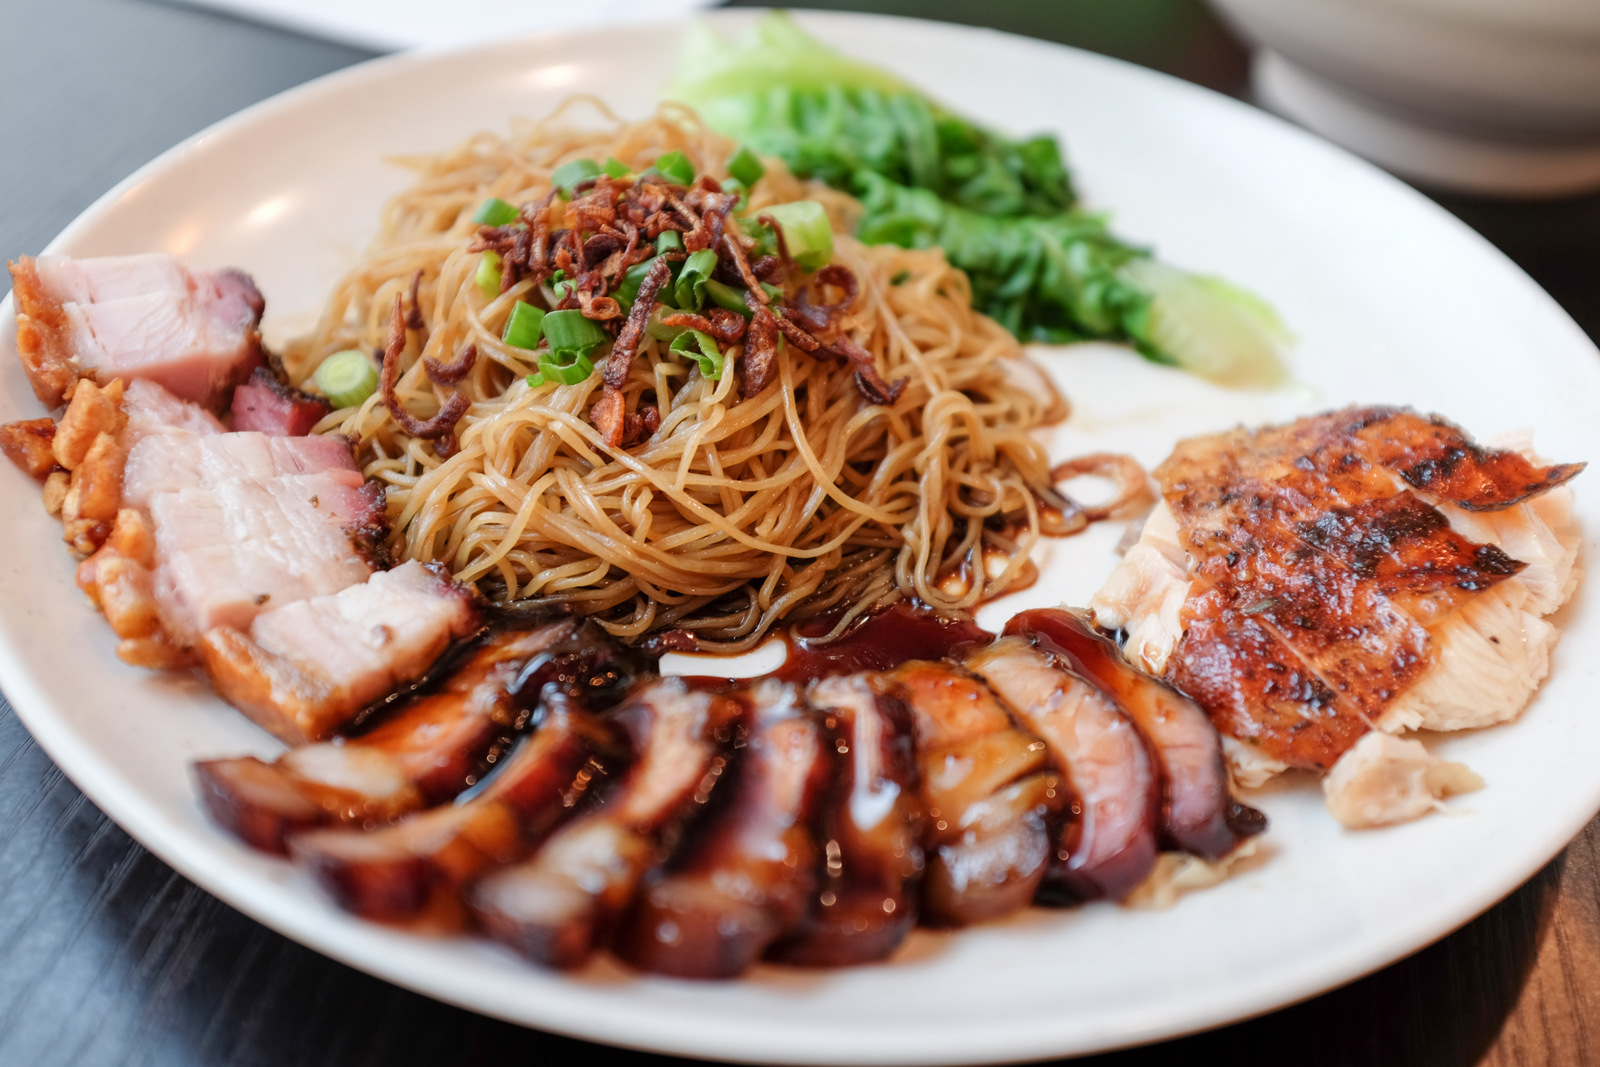 2. Boon Signature - wantan noodles with roas pork and chicken